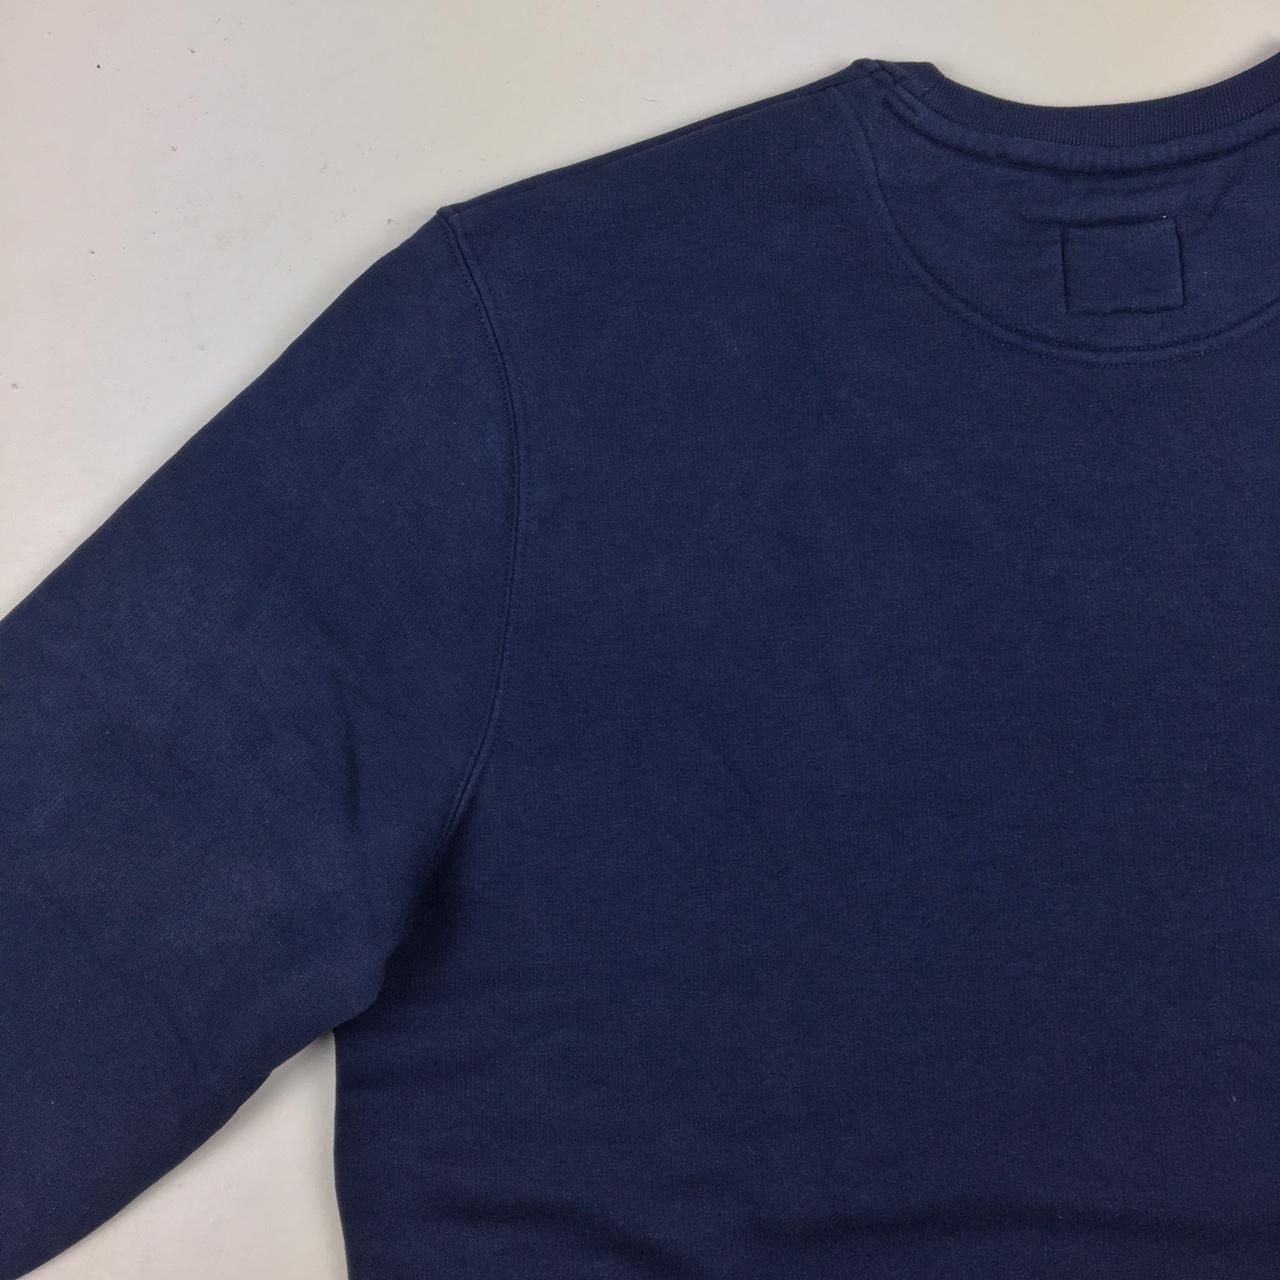 Pax Cultura sweatshirt -It has a stain caused by... - Depop